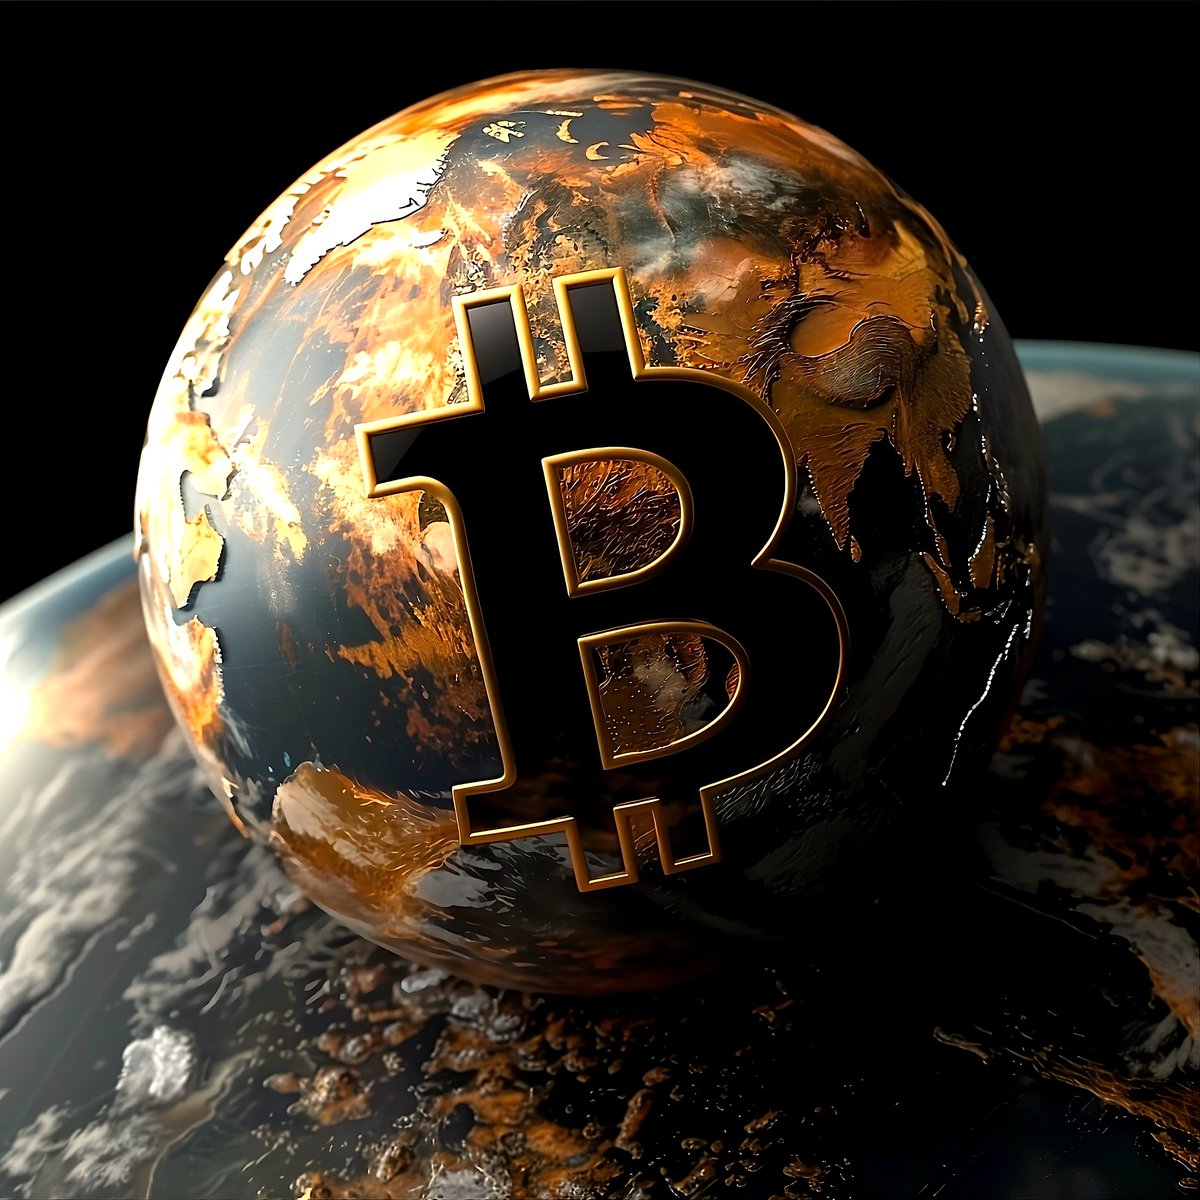 '#Bitcoin will turn 3rd world countries into 1st world countries.' -@Andrew_J_Howard